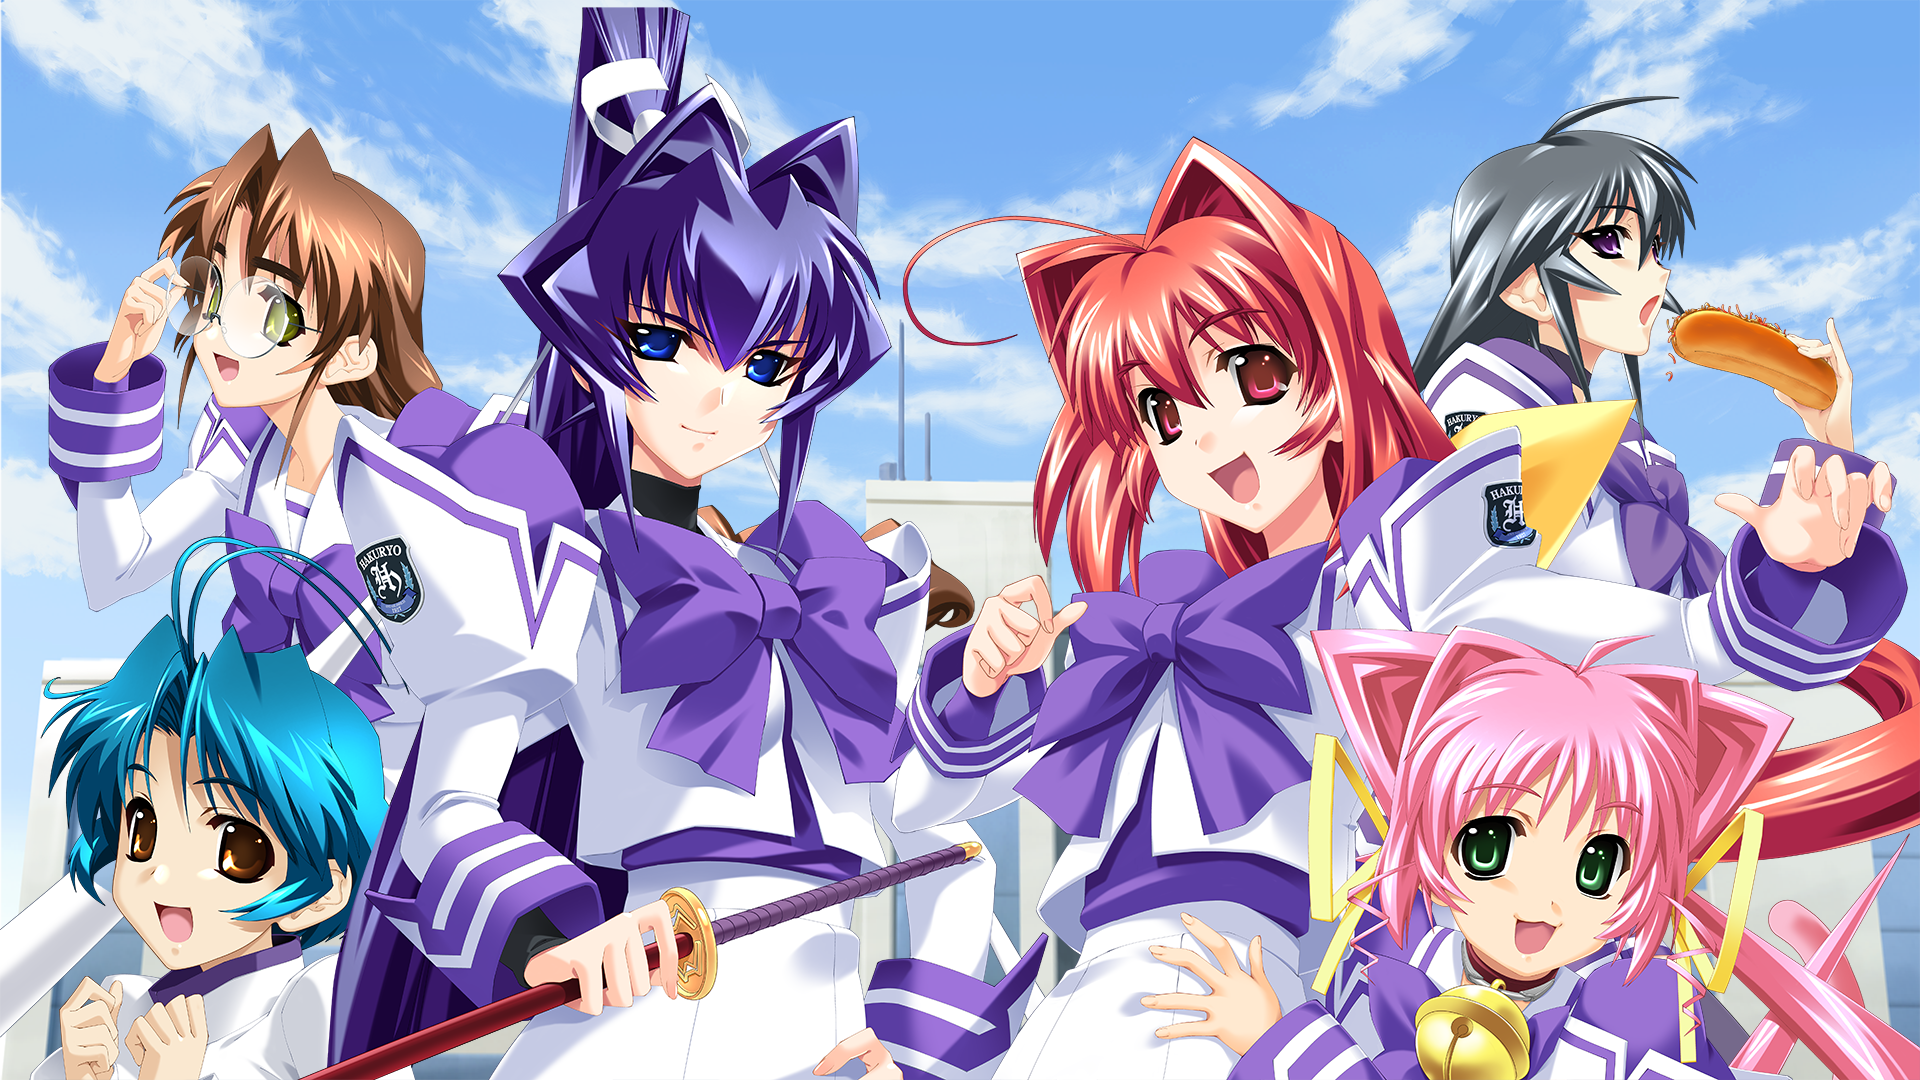 Muv-Luv Smartphone Version Pre-Launch Play Campaign!